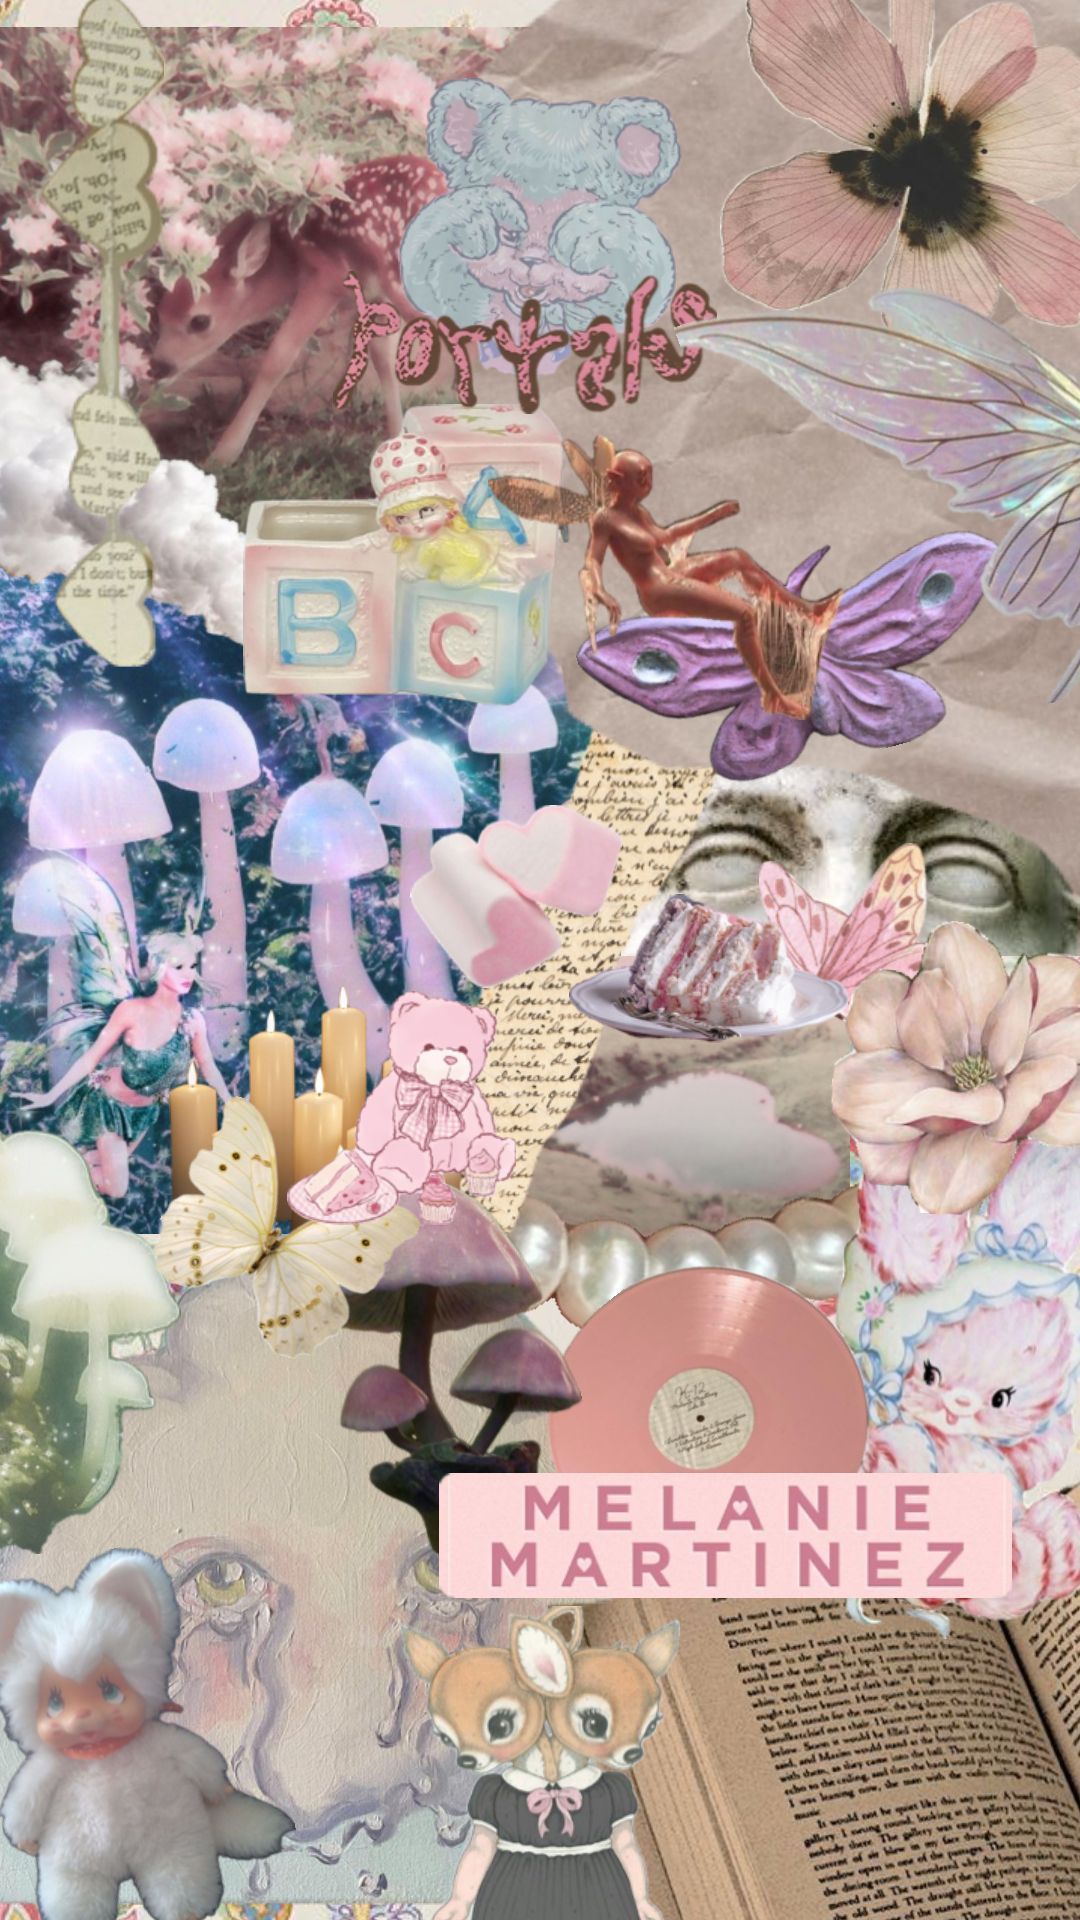 Aesthetic wallpaper for phone with pink and purple colors - Melanie Martinez